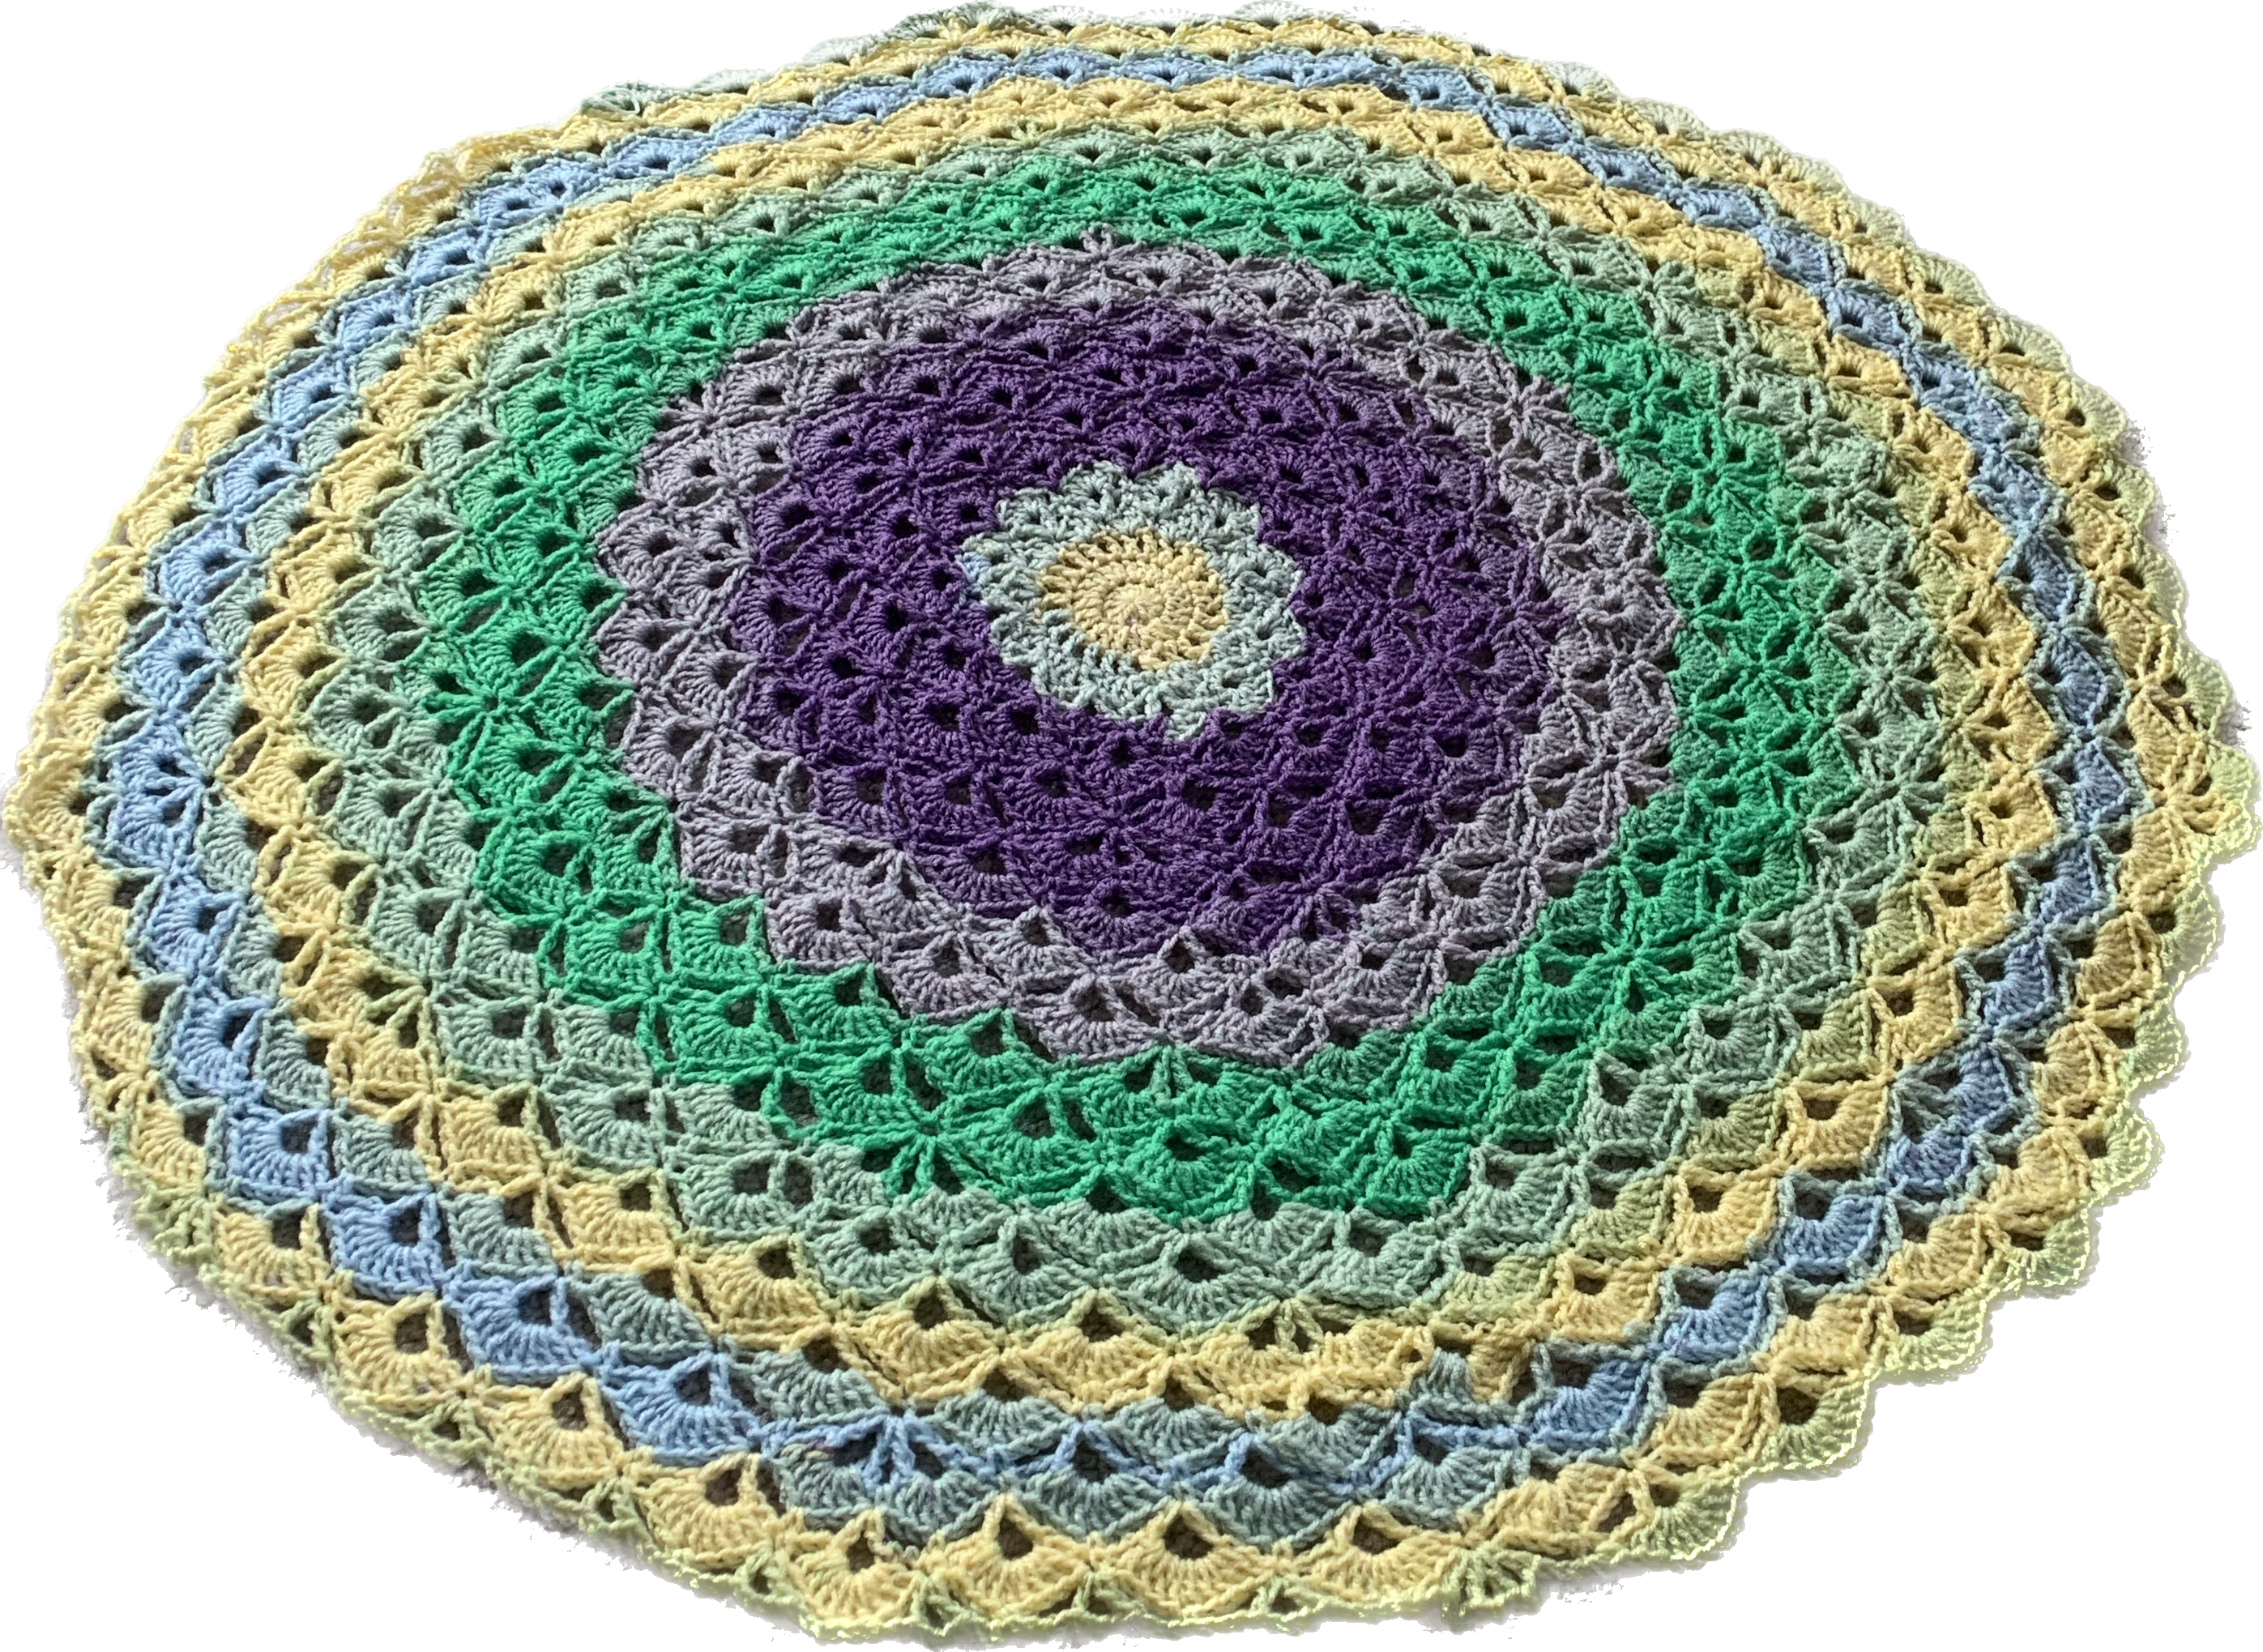 a round, pastel, crochet blanket filled with shell-like stitches